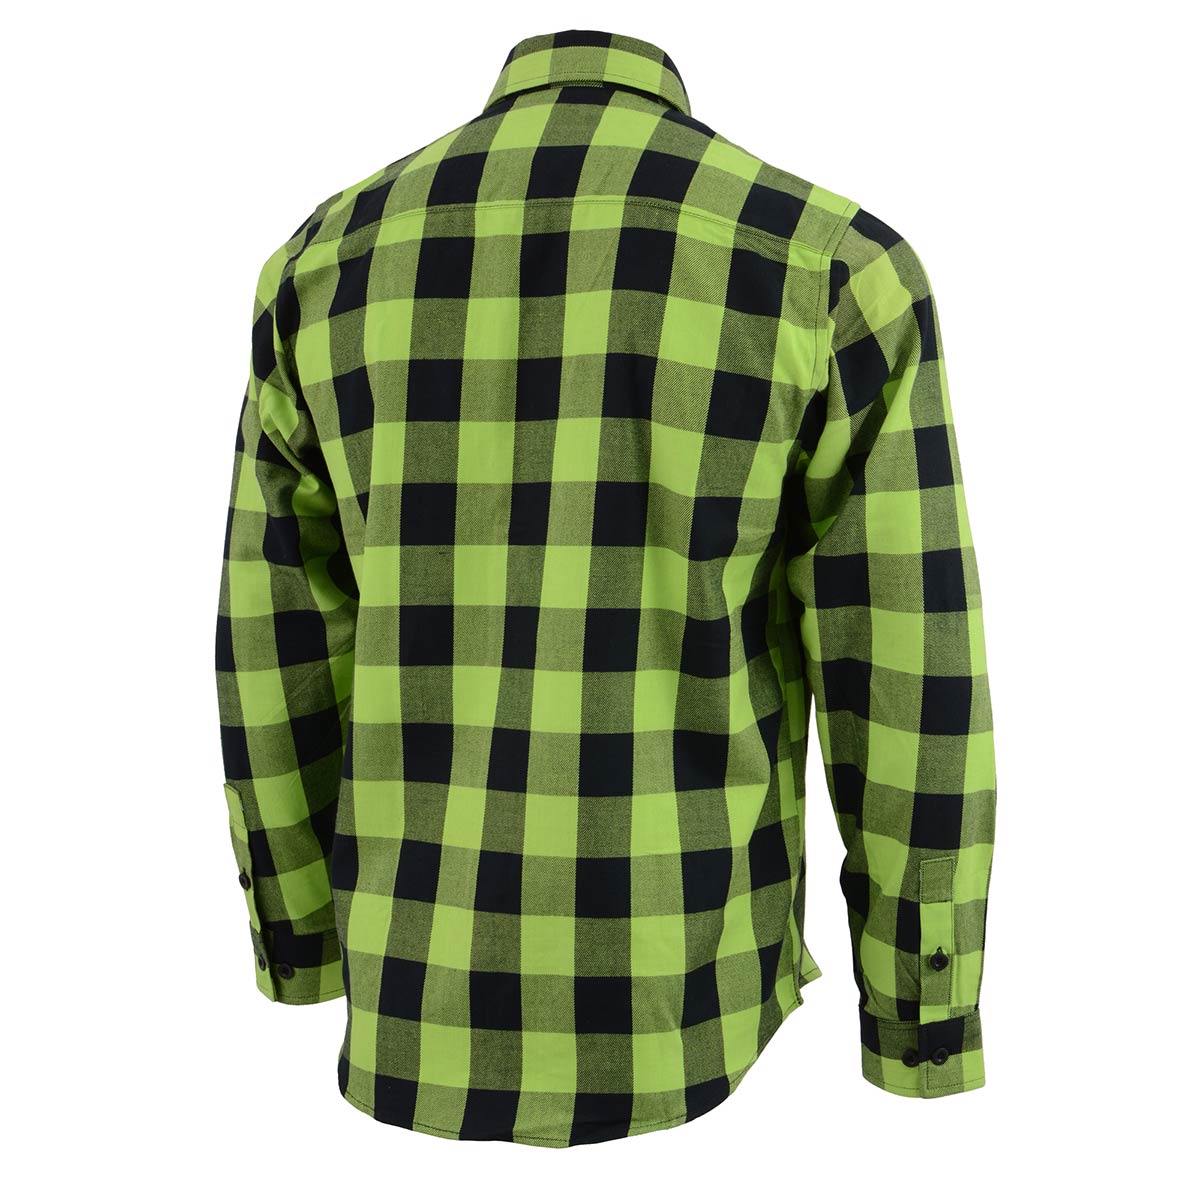 Milwaukee Leather Men's Flannel Plaid Shirt Black and Neon Green Long